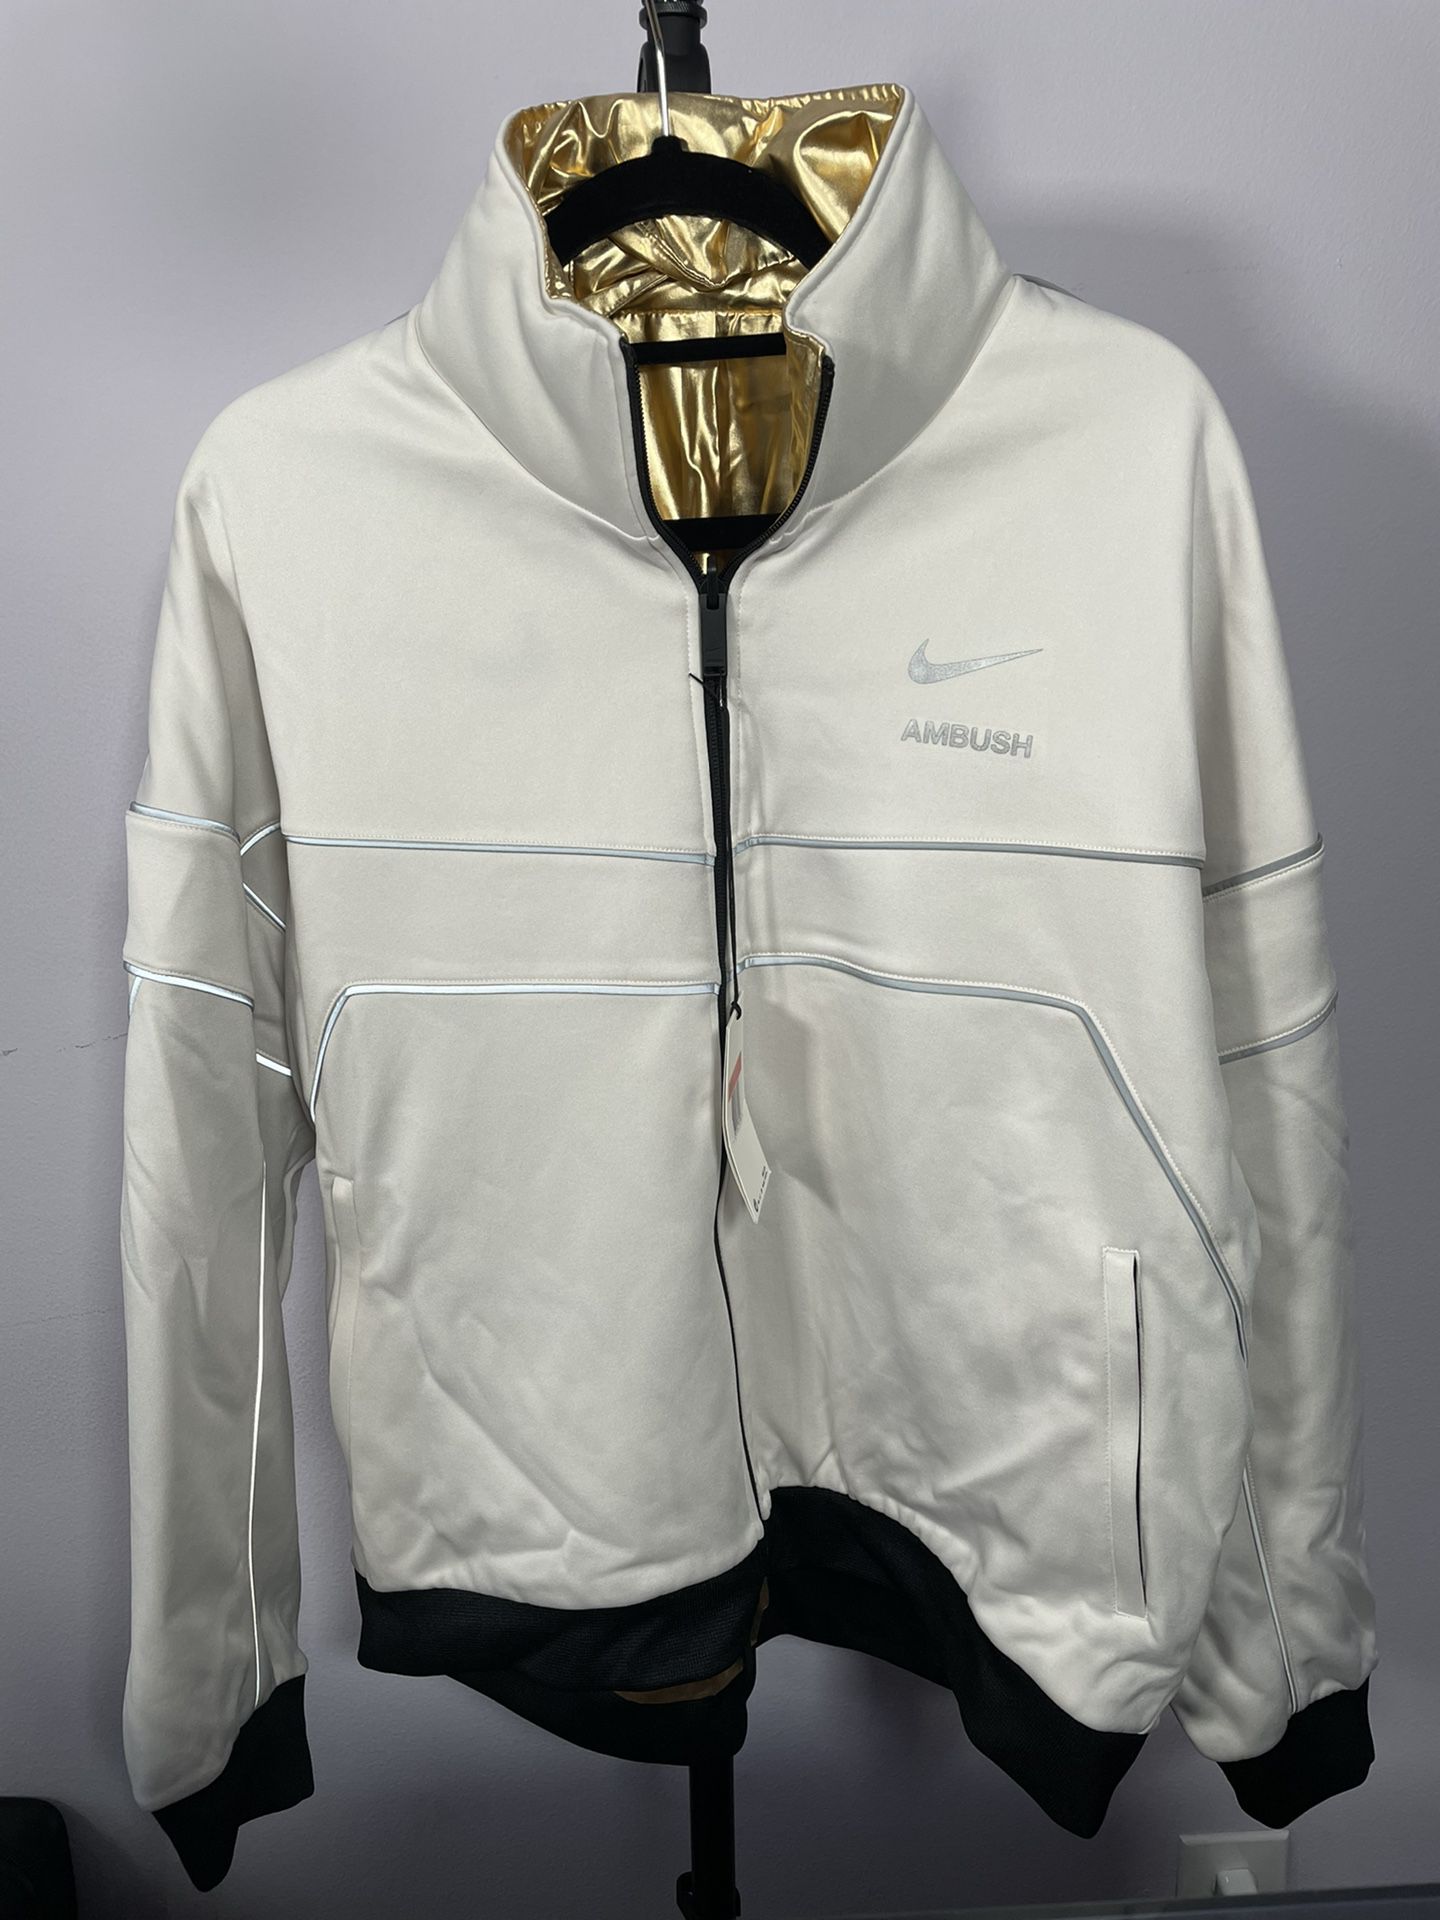 Brand New, Nike Women's Large L, Yoon Ambush Jacket, White Gold for Sale in  Hacienda Heights, CA - OfferUp